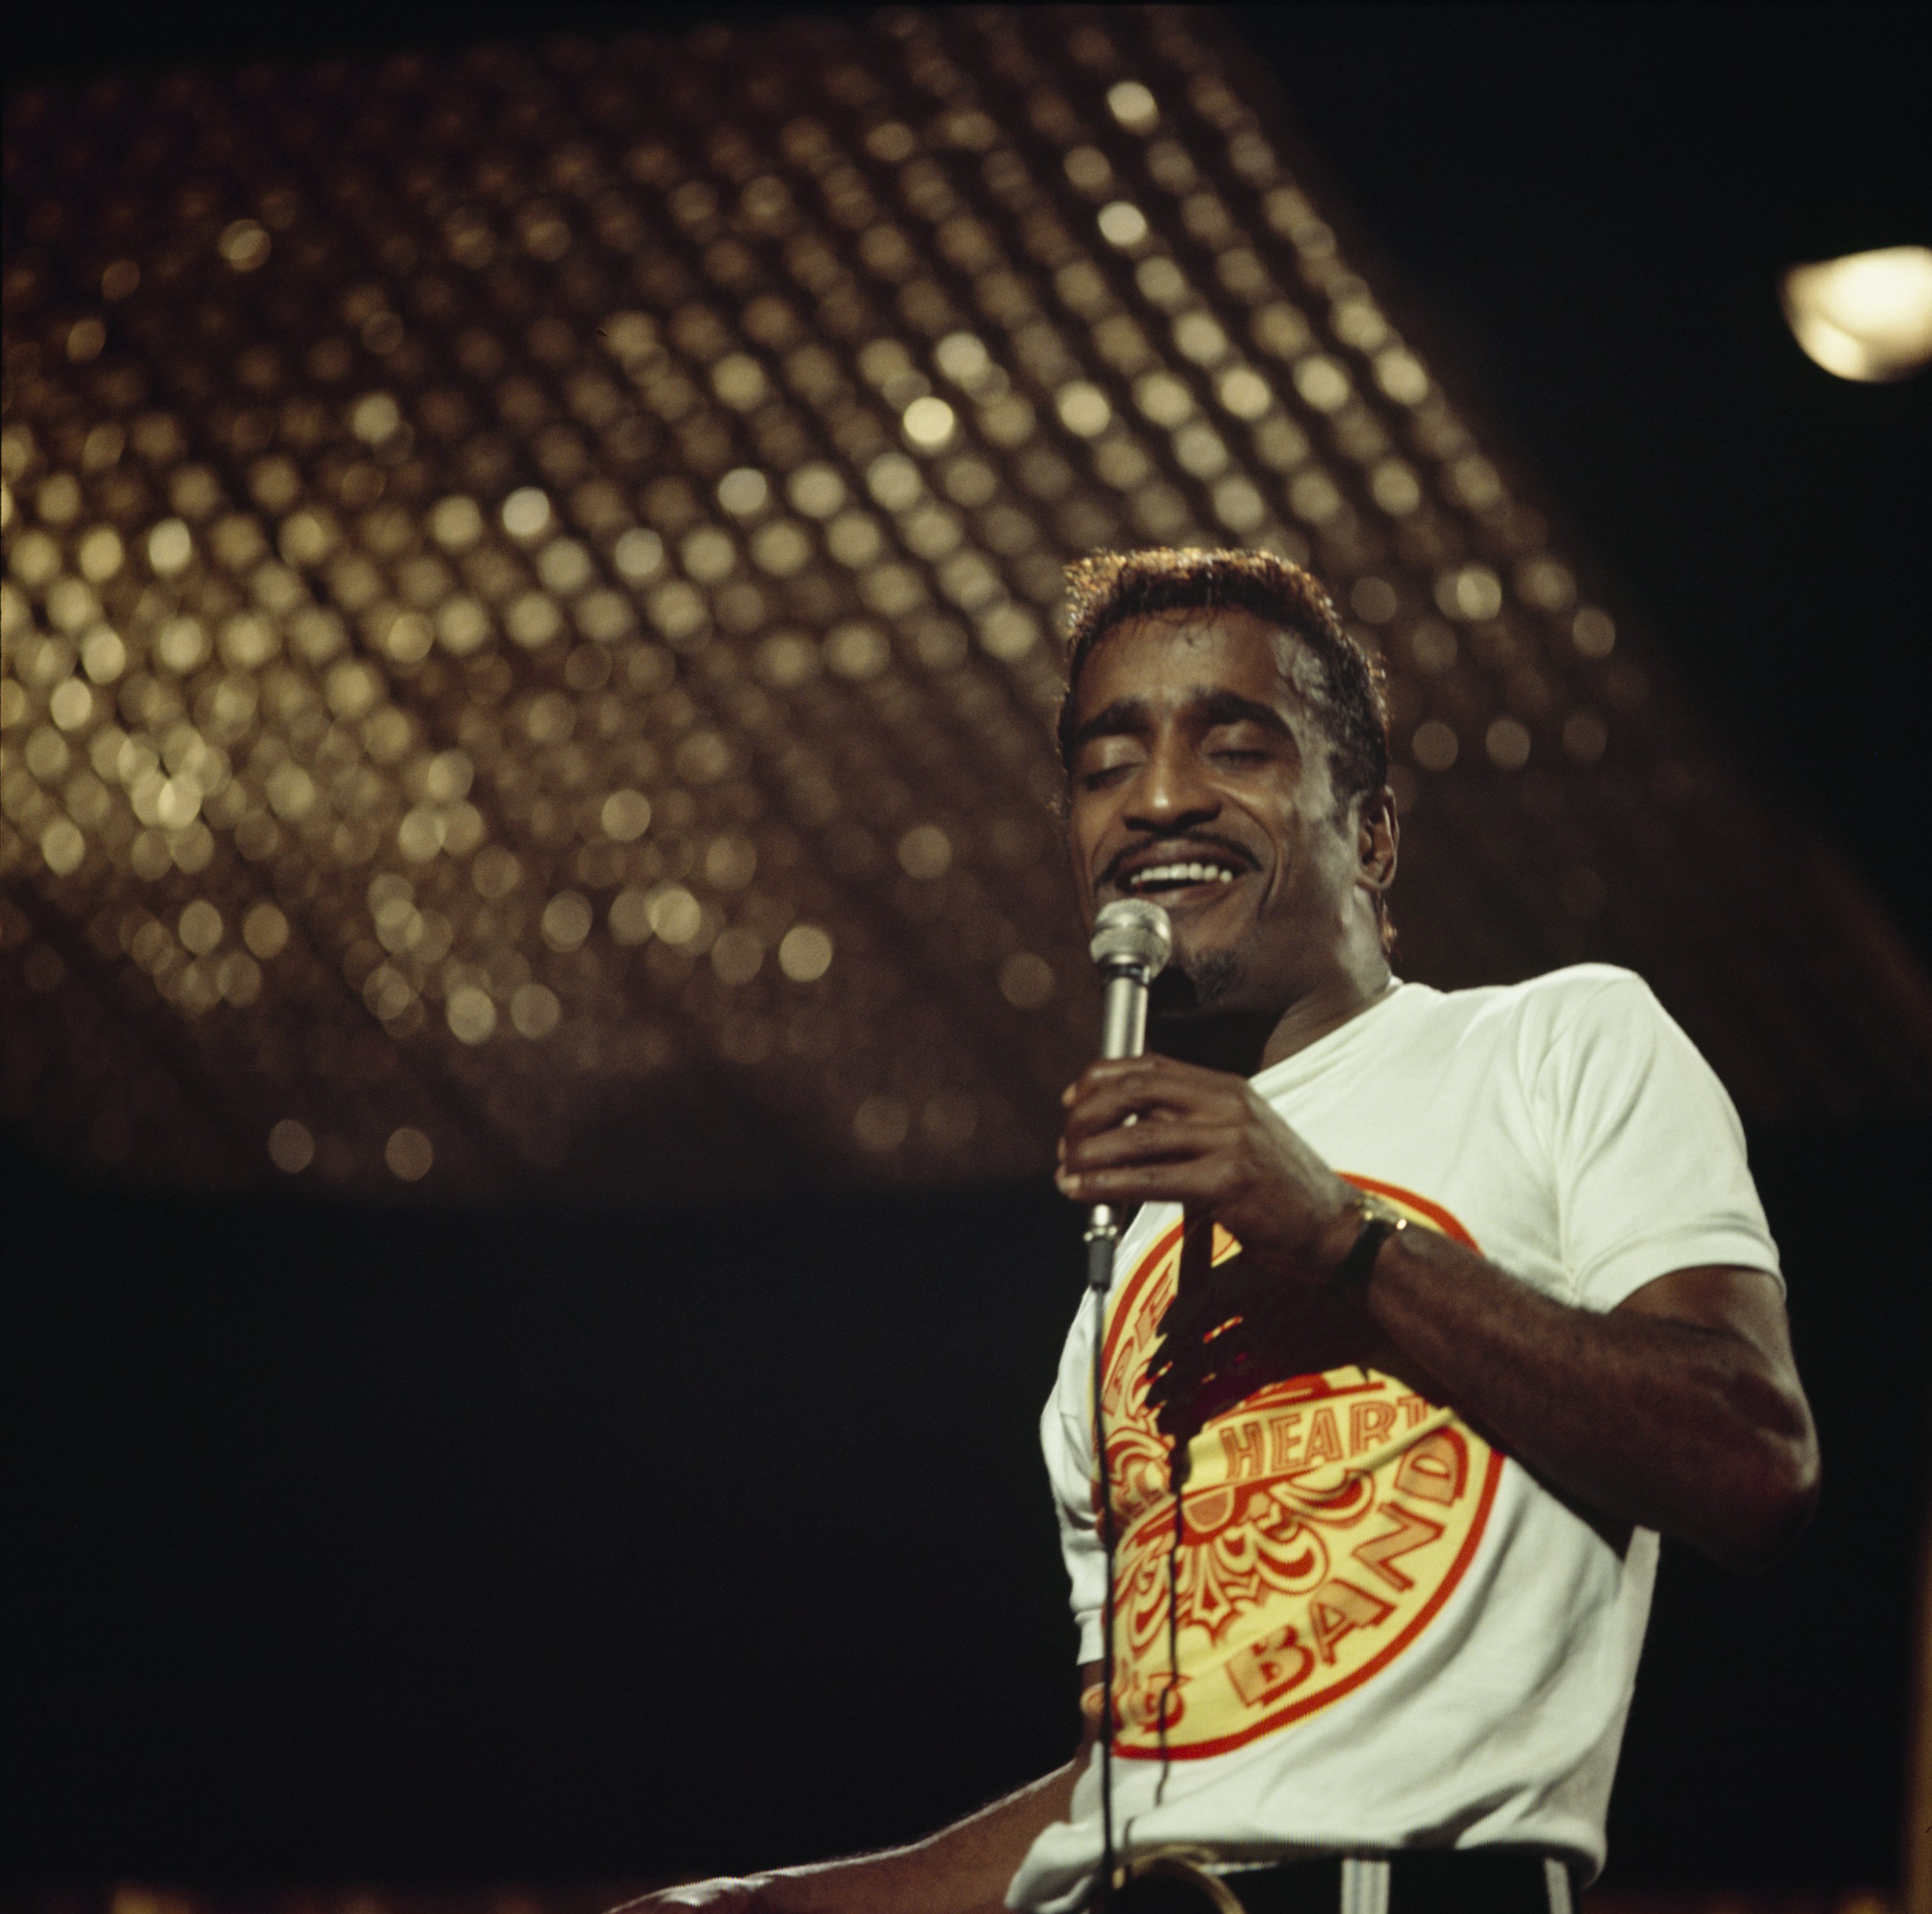  Sammy Davis Jr, wearing a Beatles t-shirt, performs on stage at The Talk of The Town in London, England in 1967. | Source: Getty Images 